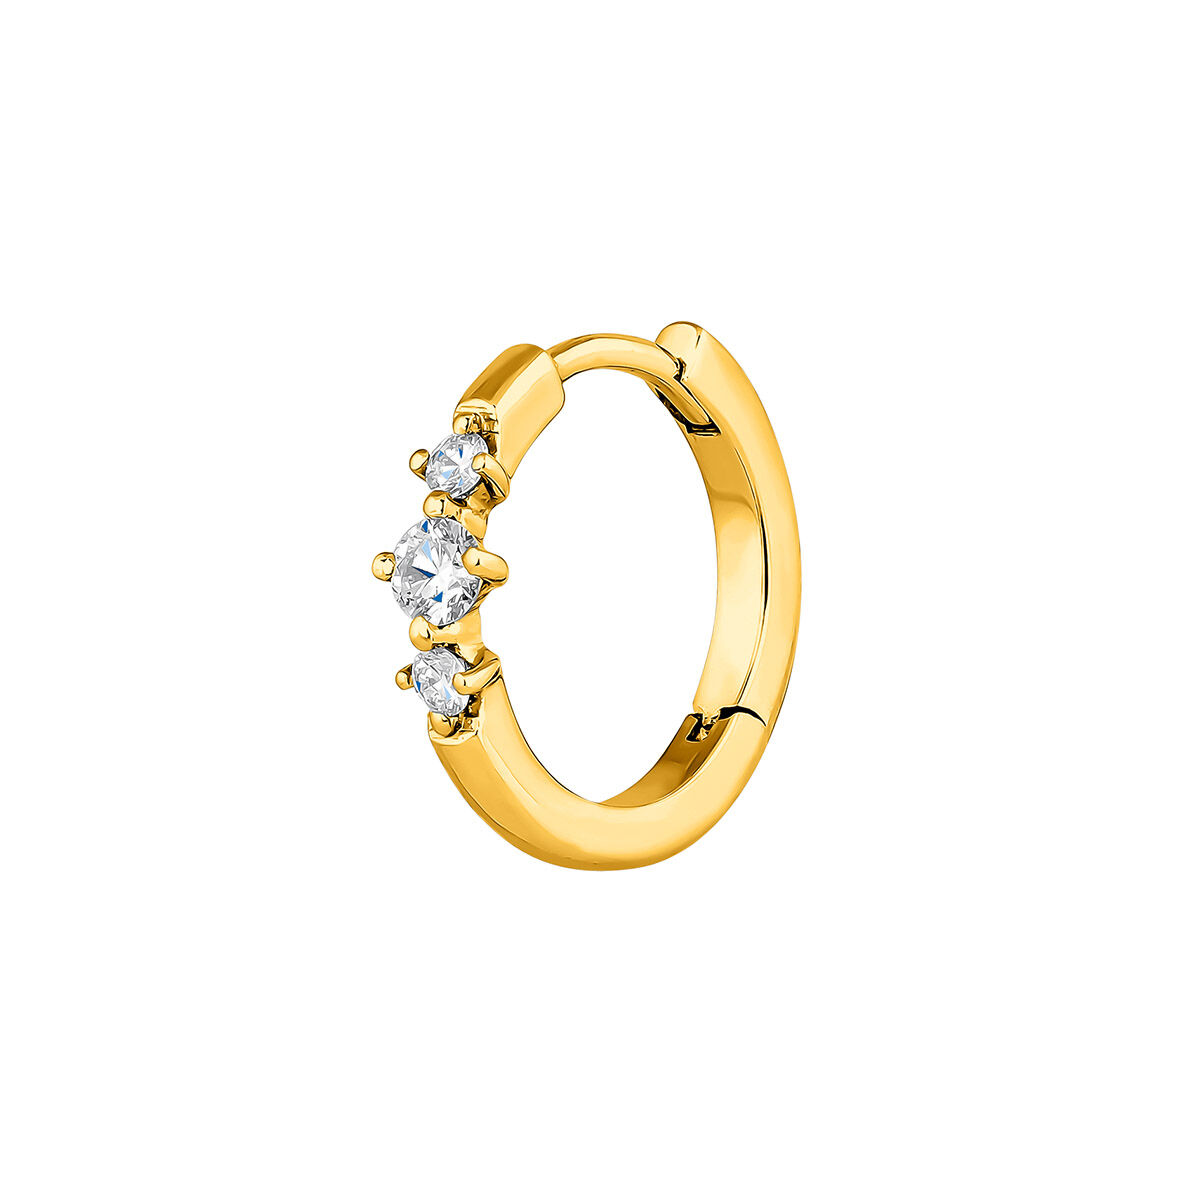 Single small hoop earring in 18k yellow gold with a 0.041ct triple diamond , J03929-02-H, mainproduct